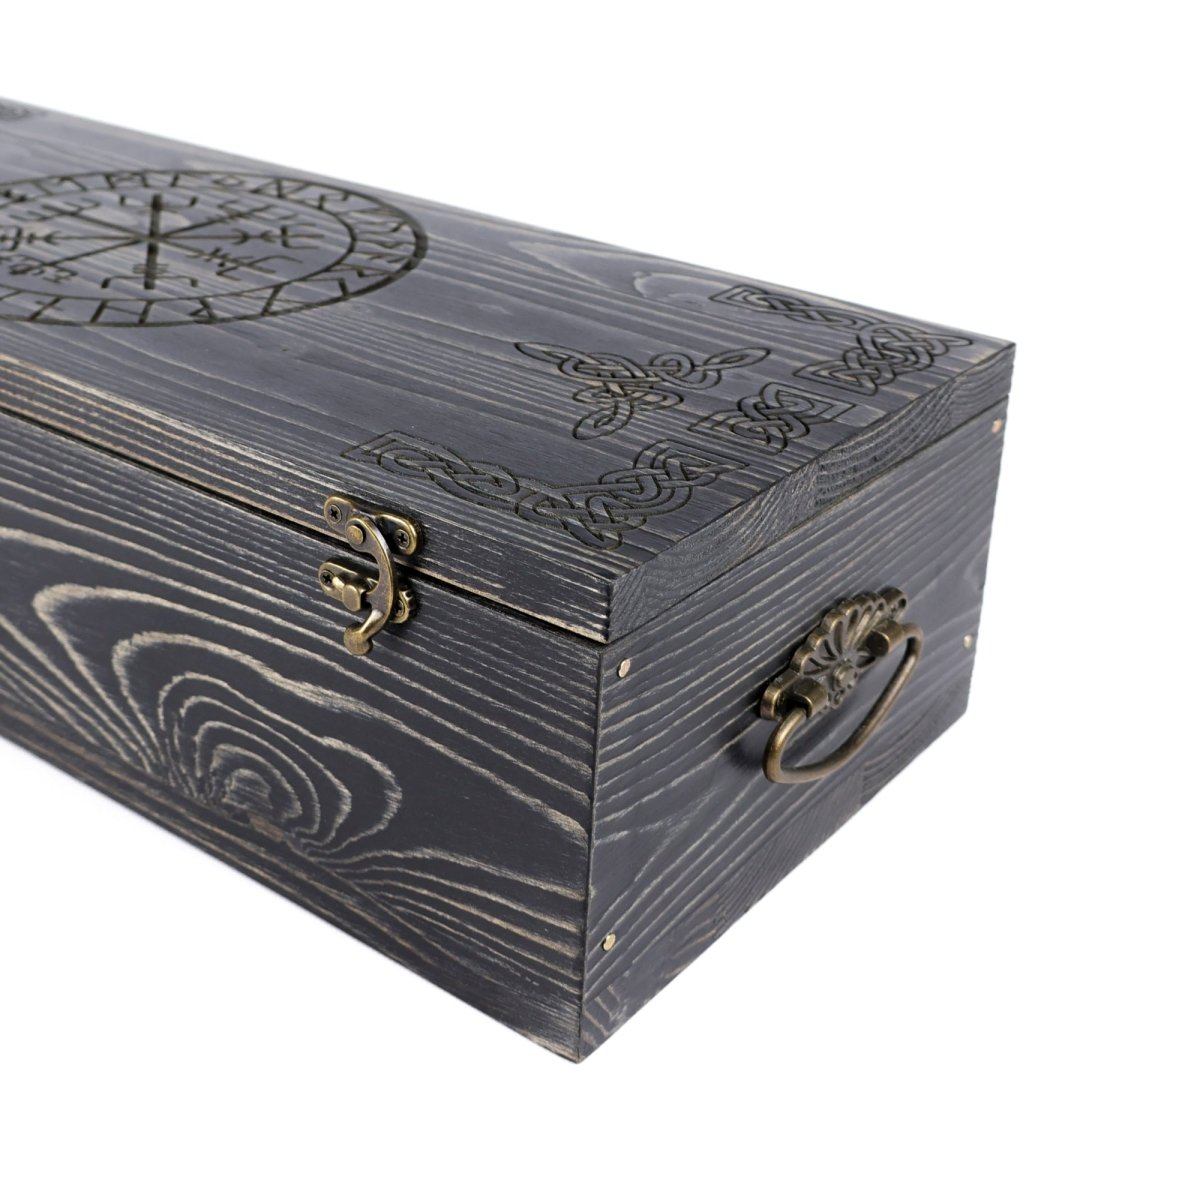 Runic wooden box for big hammer from AncientSmithy